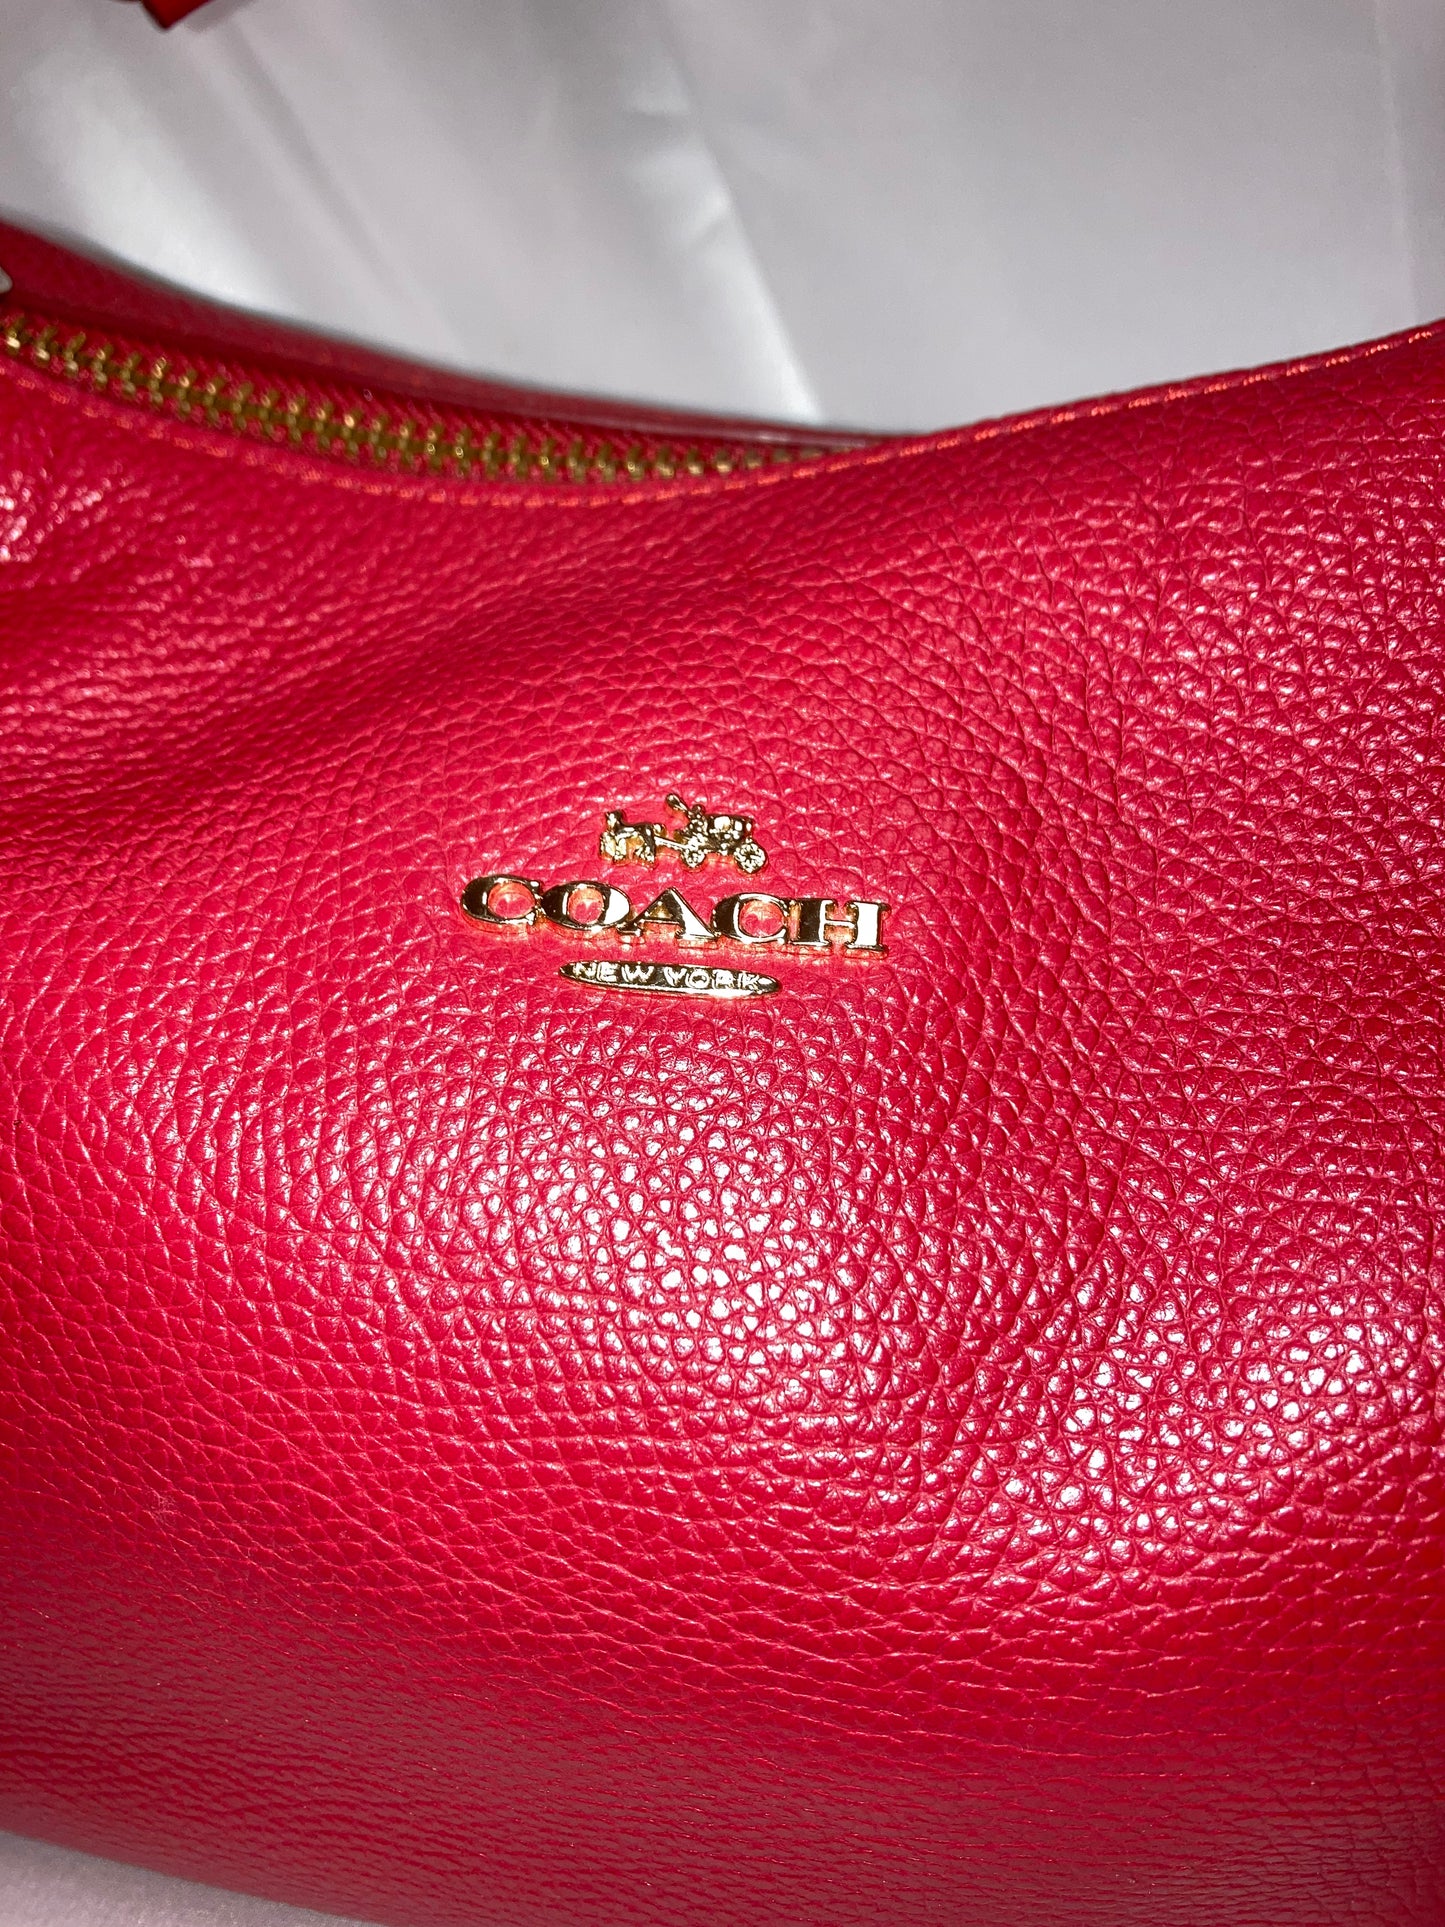 Red Leather Coach Purse